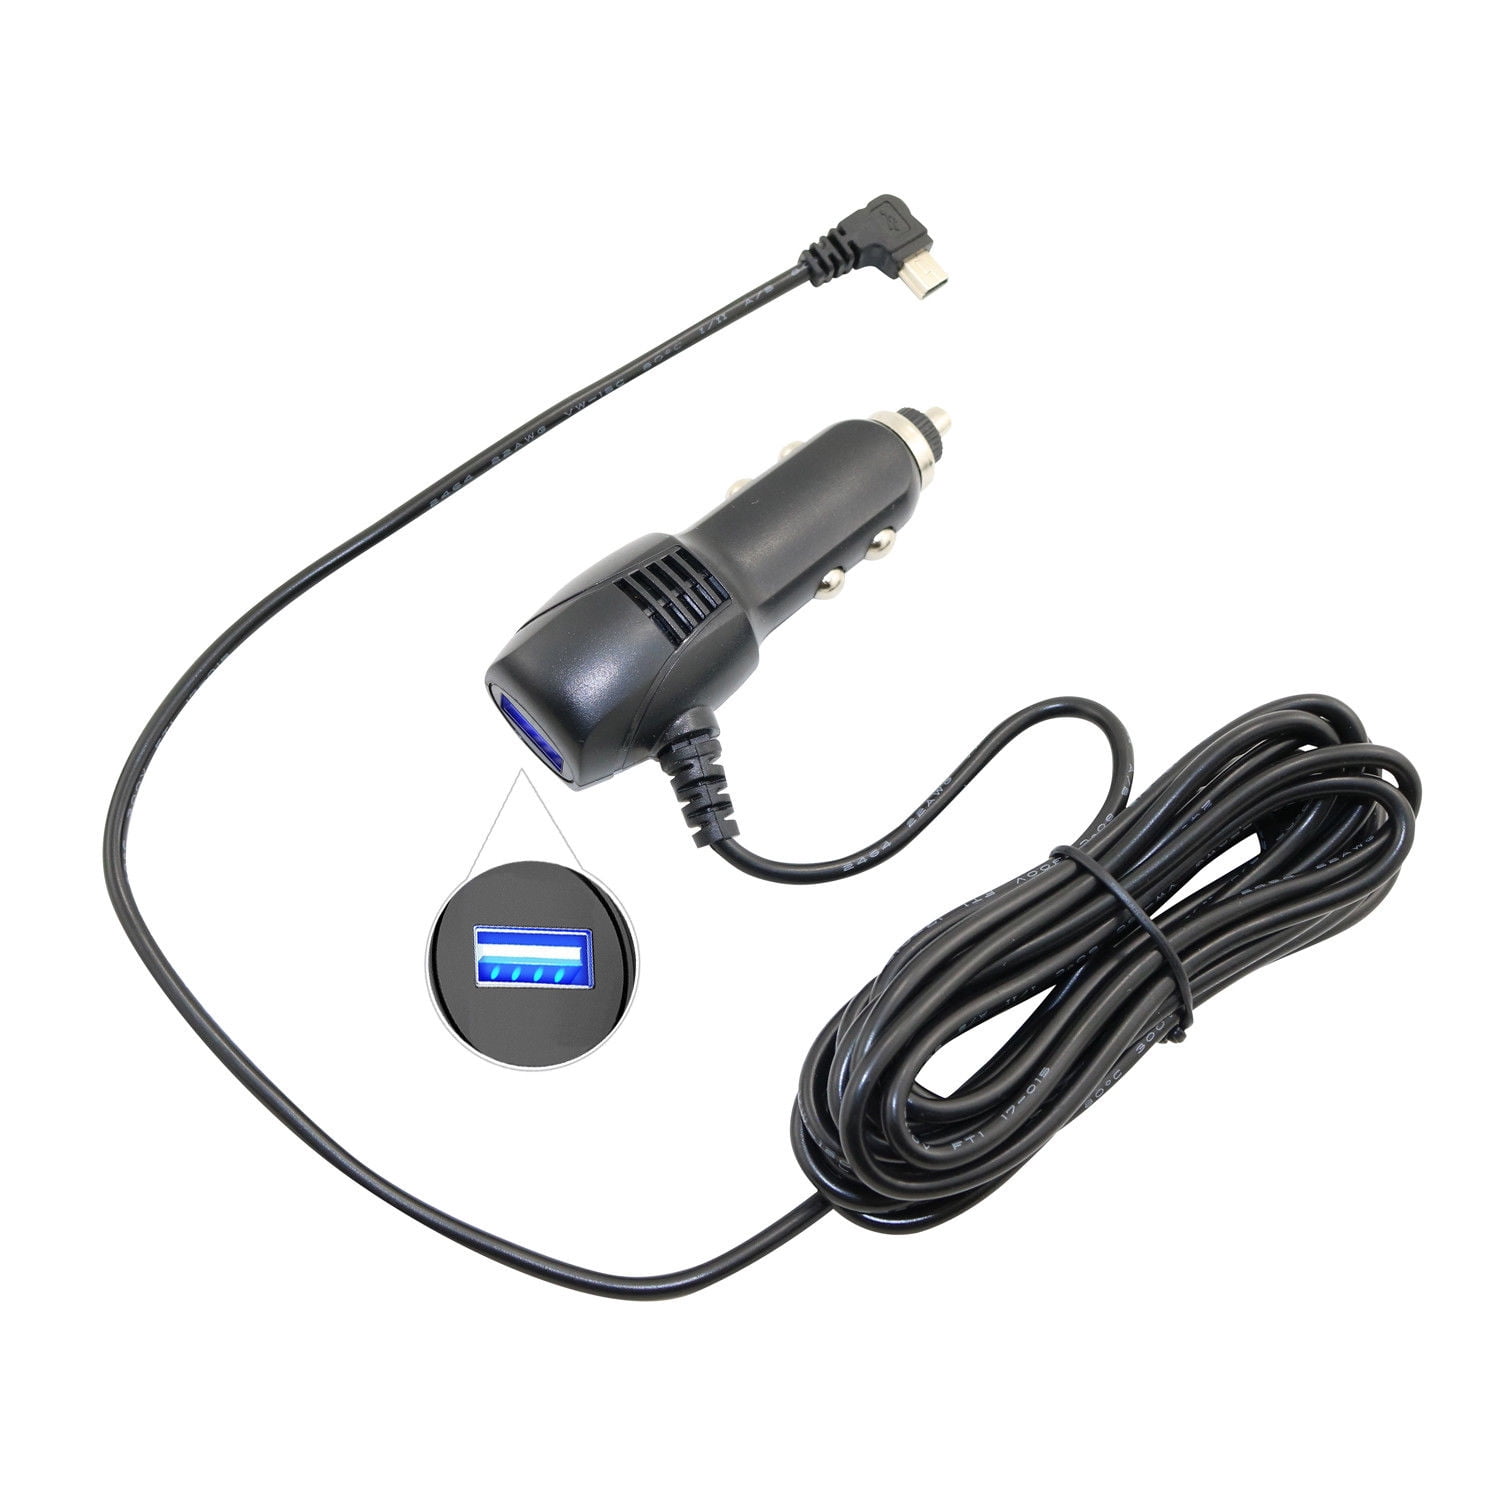 AC Adapter Power Cord For Garmin GPS Nuvi 370 t 270 t 3450 LM/T Car Charger 